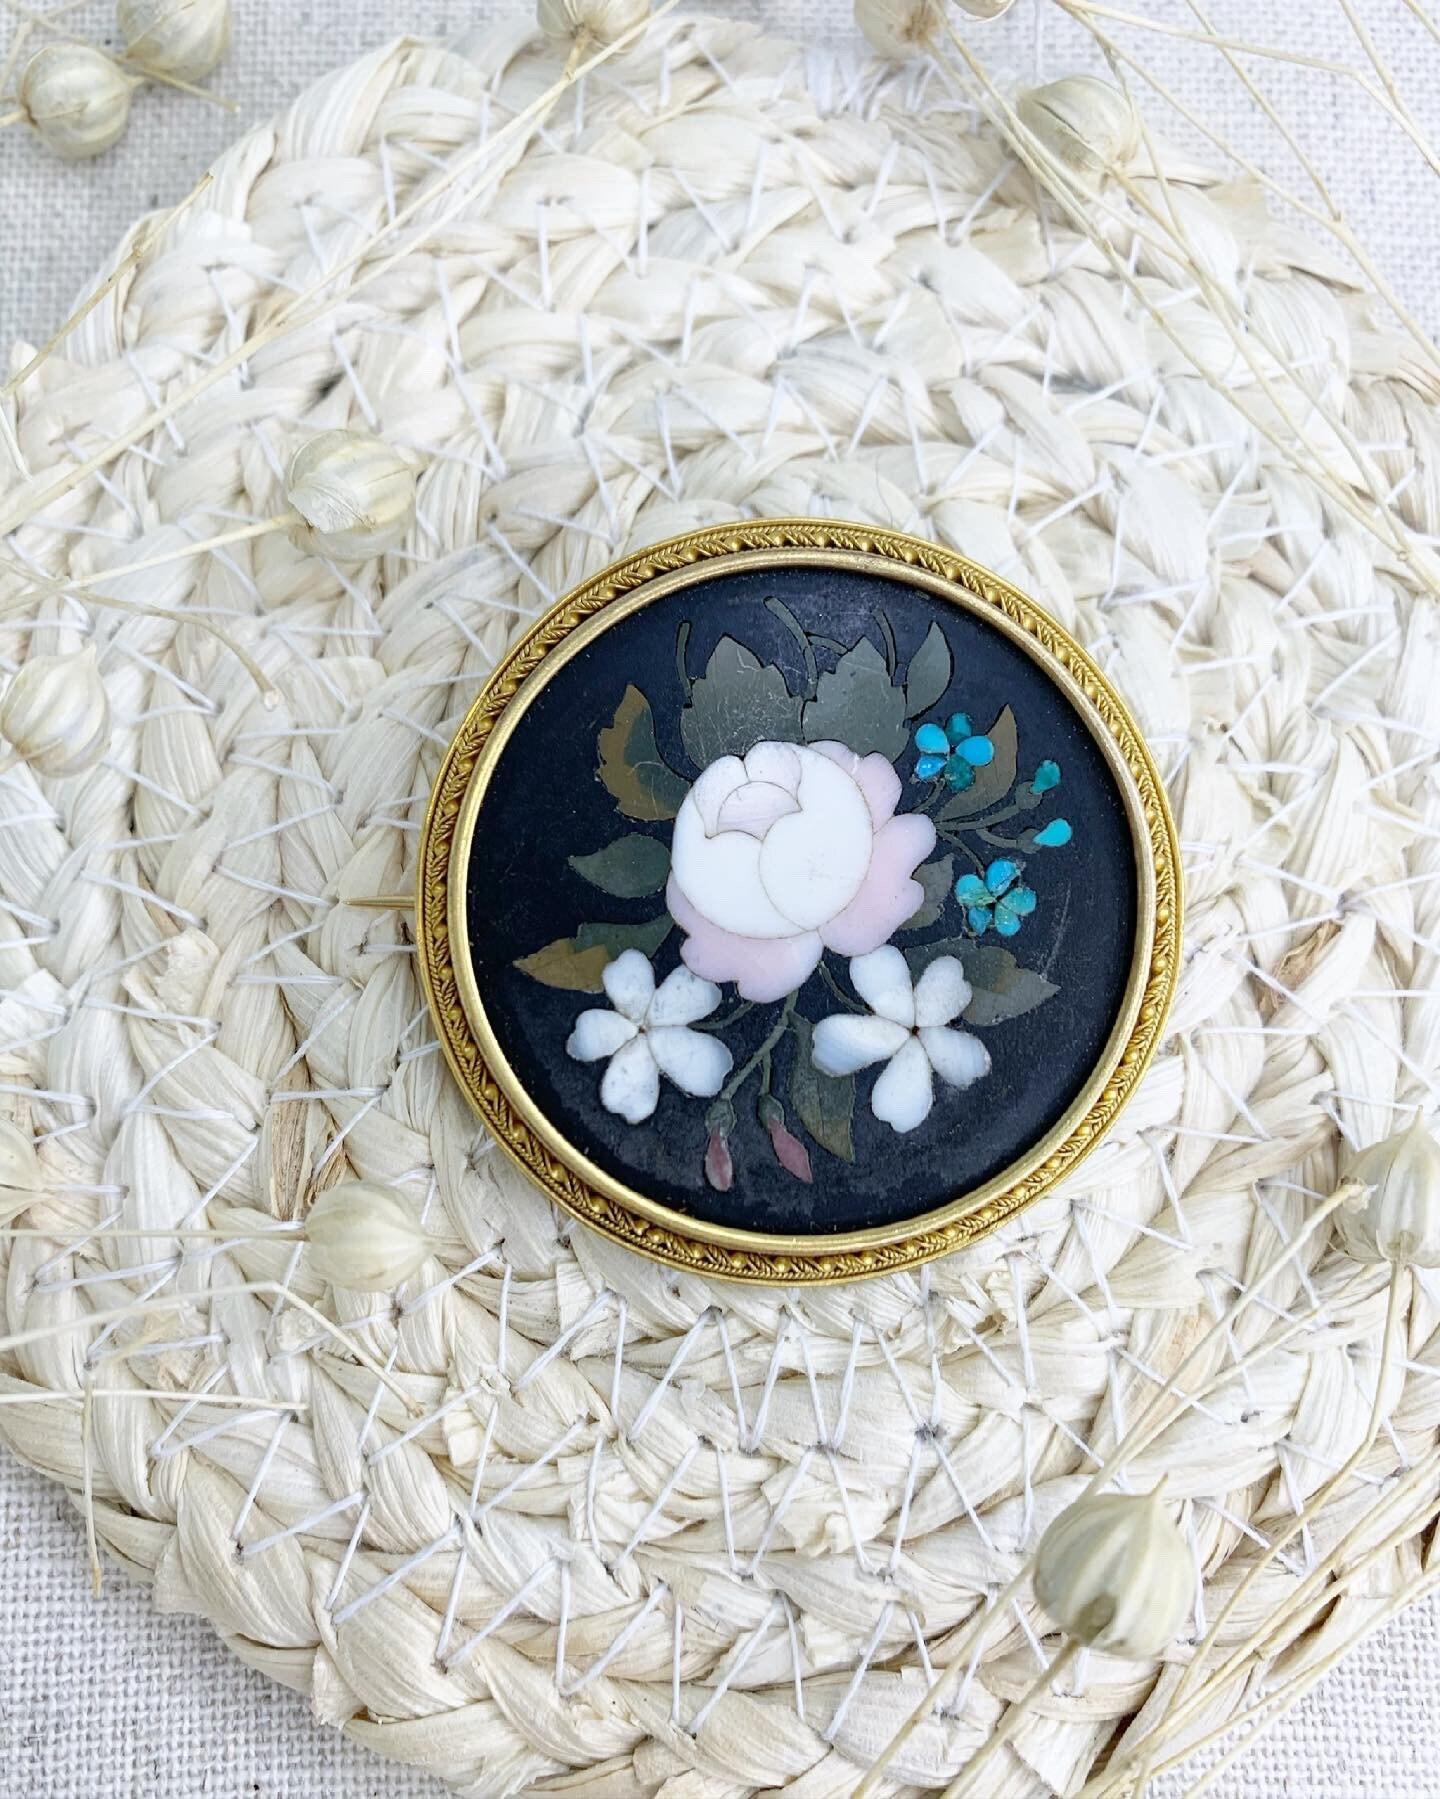 Antique Victorian 15ct gold Pietra Dura Floral Mosaic Brooch

Circa 1880

A superb example of a Victorian PIETRA DURA brooch. 

Set in 15ct gold with a plaque depicting an array of beautiful flowers. 

Good quality gold work and gold wire work